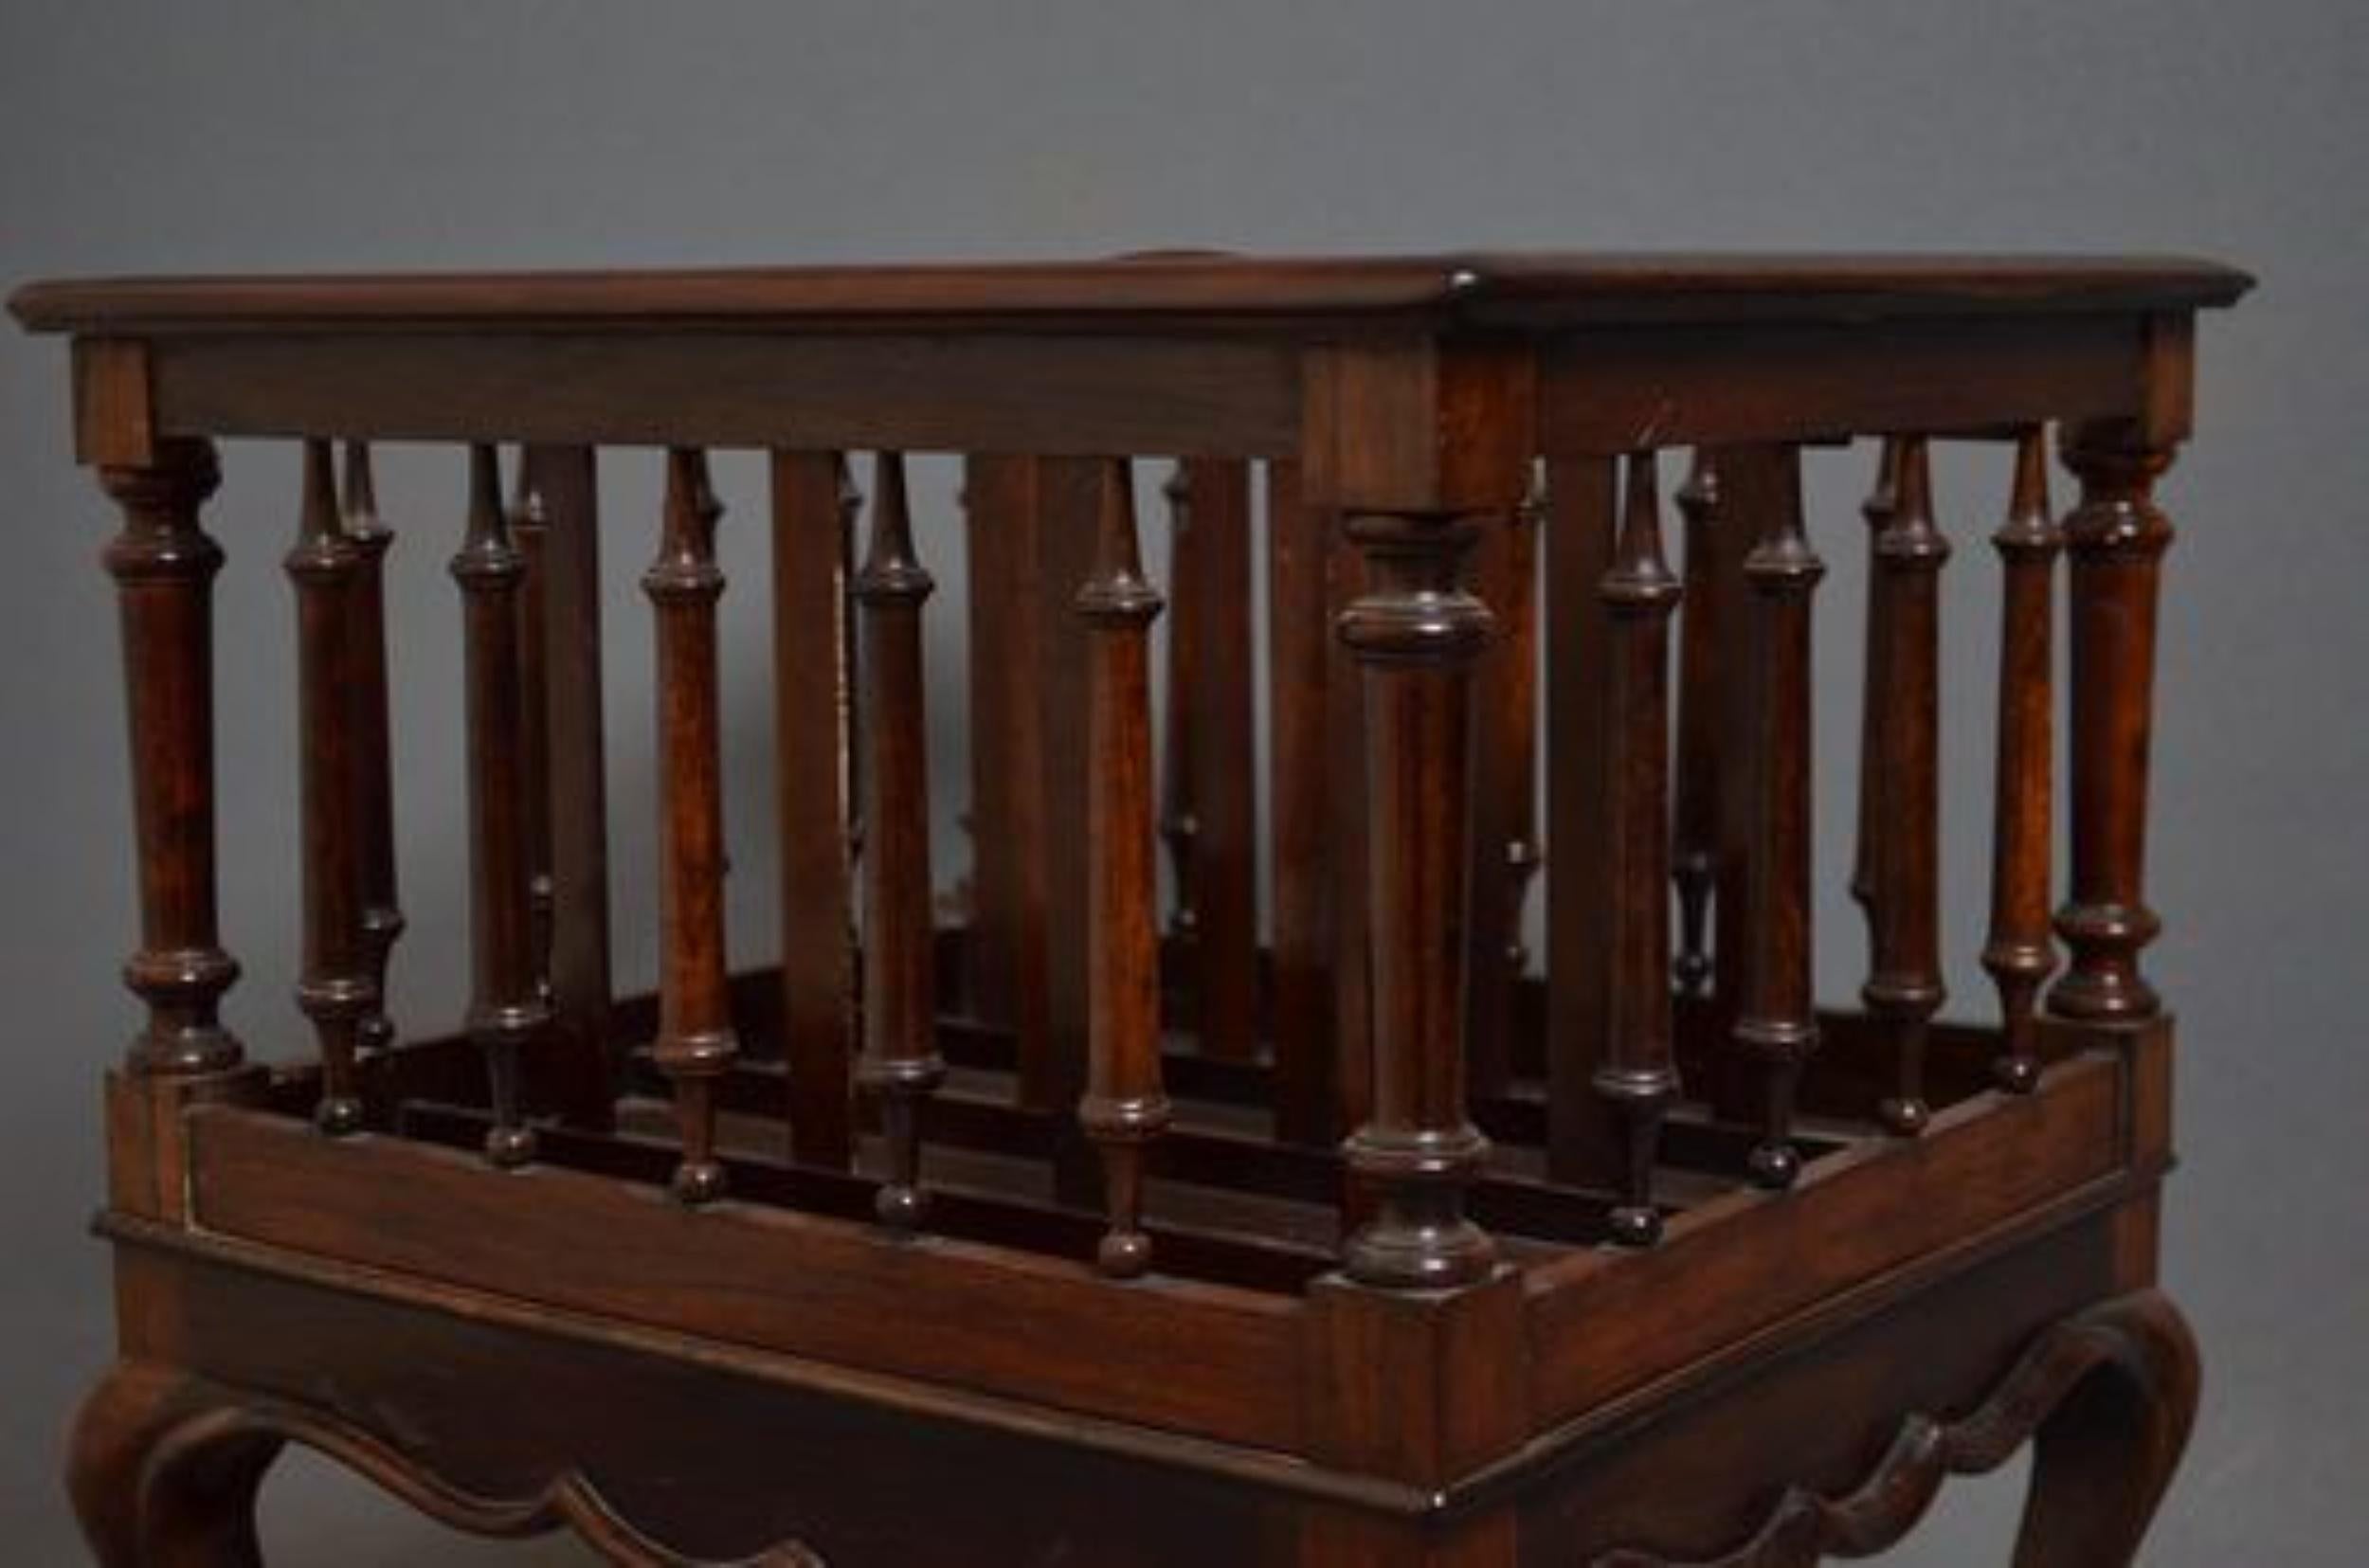 Sn820 Late Victorian, rosewood canterbury of rectangular shape, divided into 4 sections with tapering turned supports, stand on cabriole legs terminating in castors, all in original condition throughout. c1890
Measures: H 18